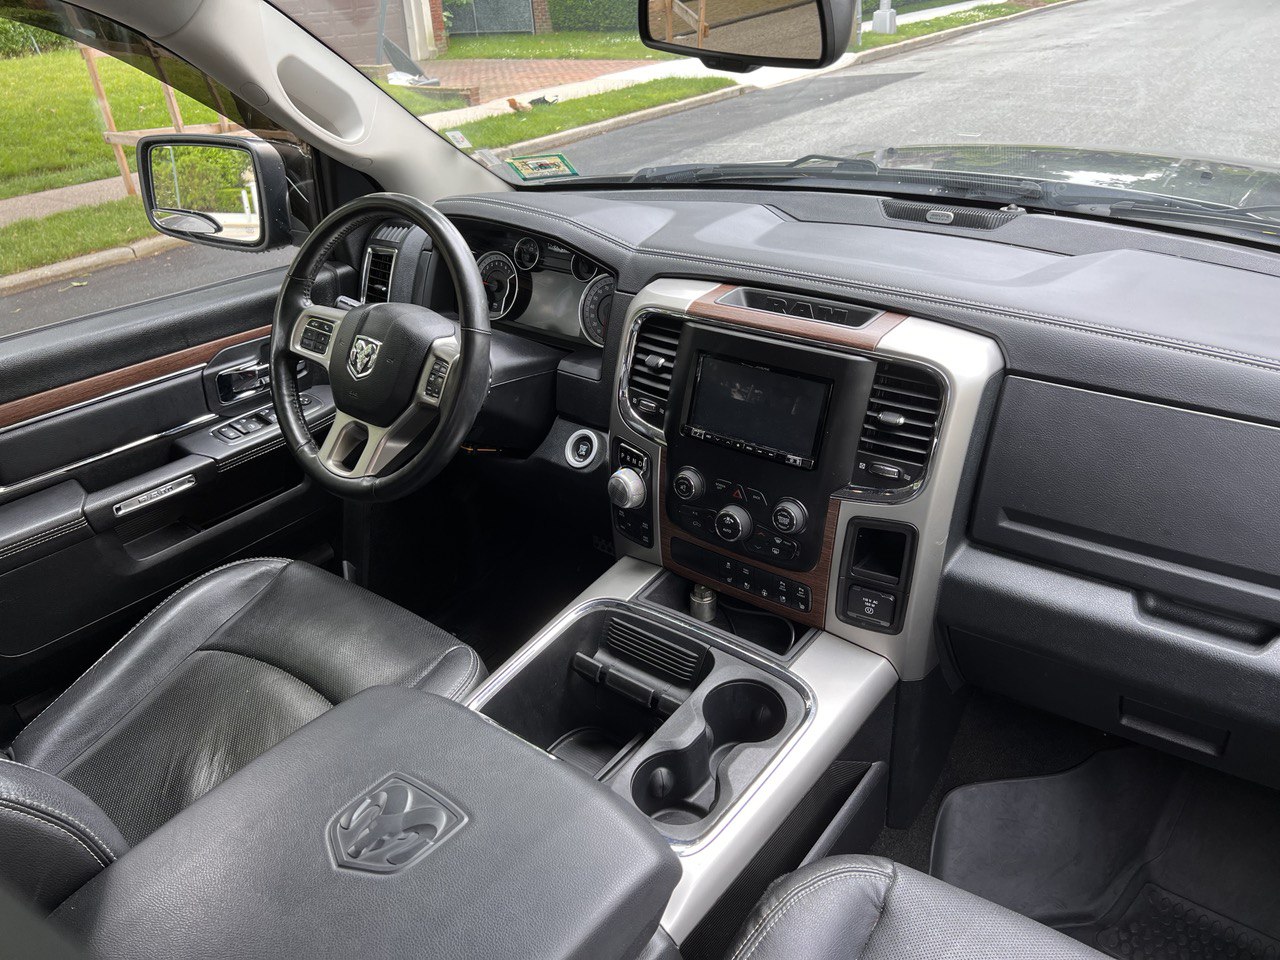 Used - RAM 1500 Laramie 4x4 4dr Crew Cab Pickup Truck for sale in Staten Island NY